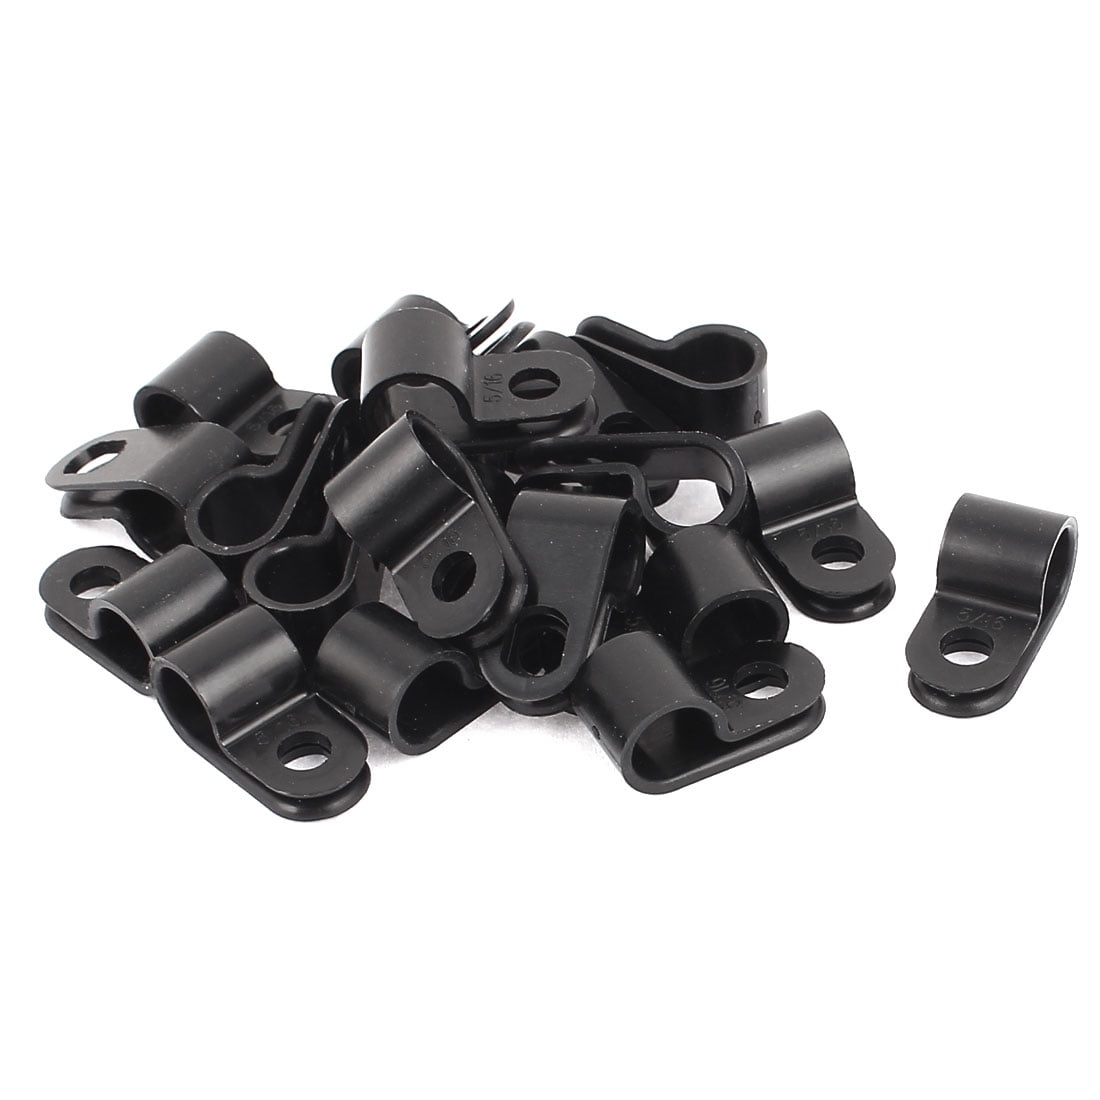 P Clips 2x Black Plastic Brake Pipe Tube Cable Wire Mounting Bracket 7.8mm 5/16" 